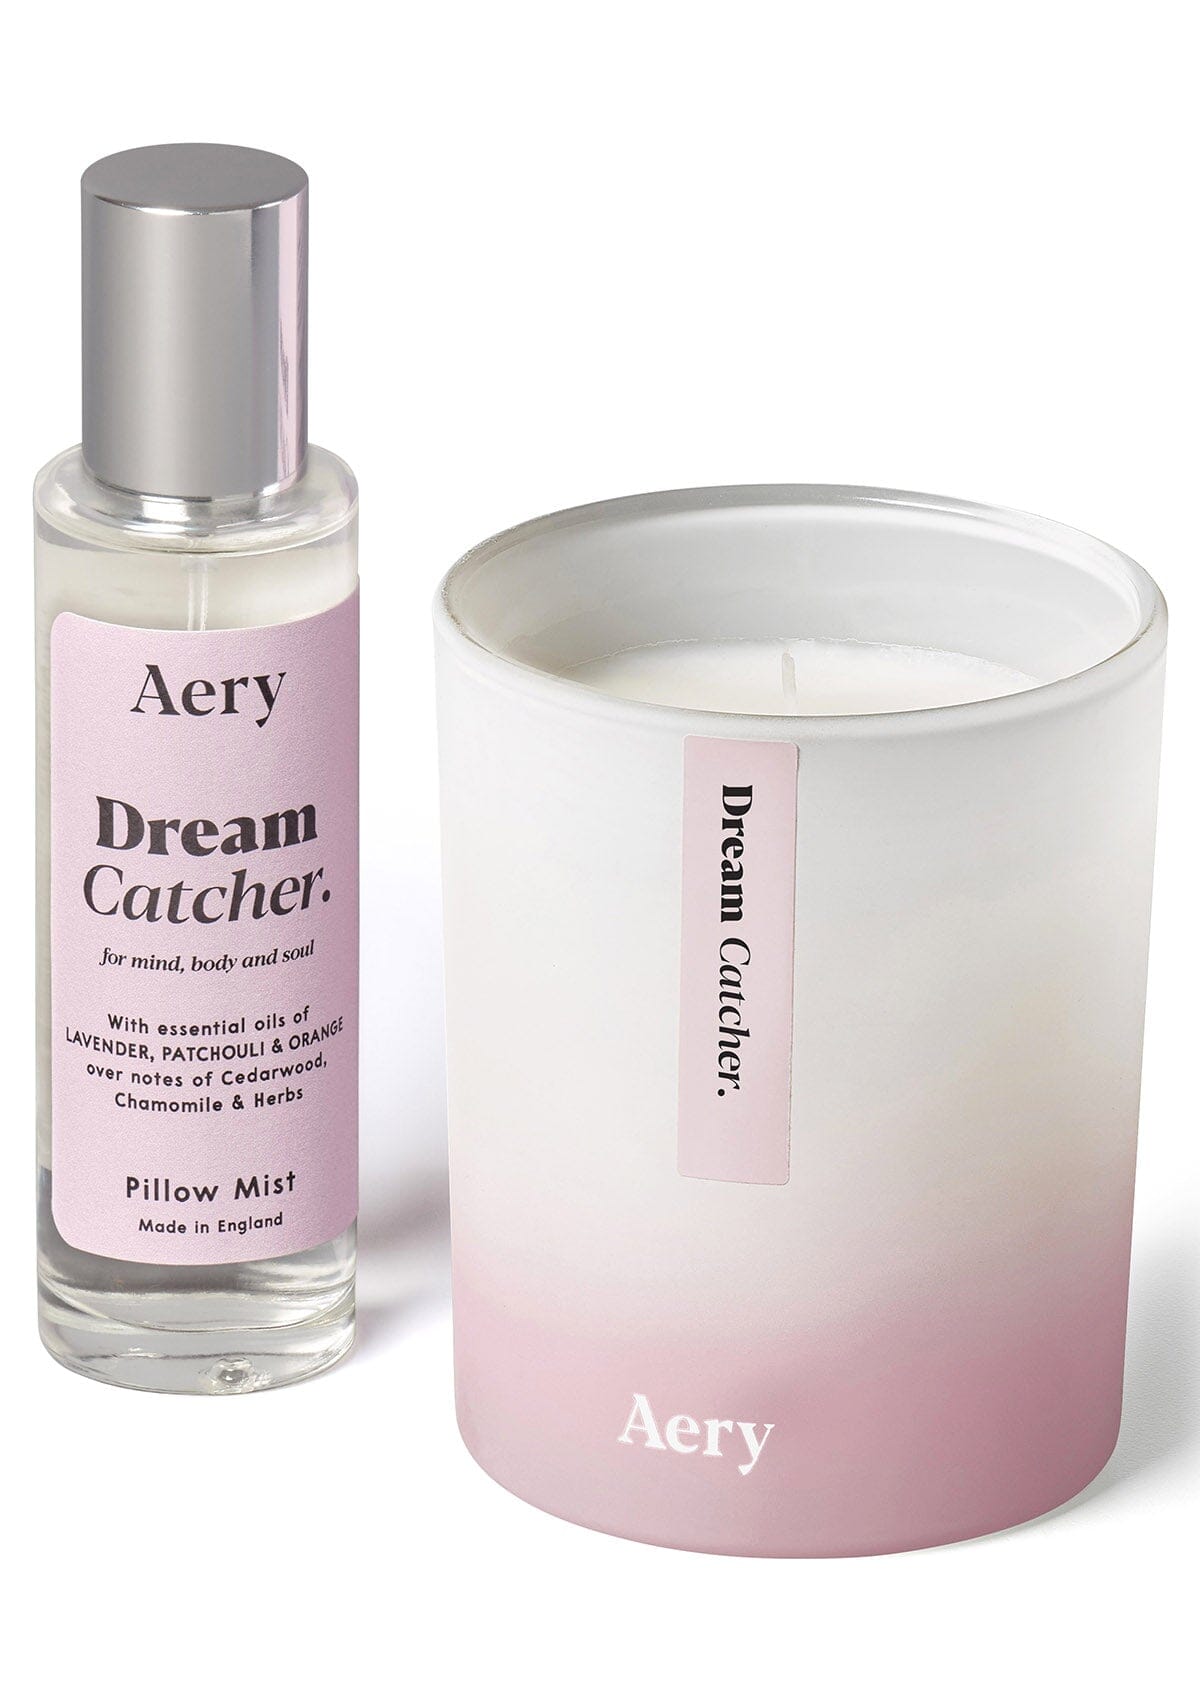 Lilac Dream Catcher candle and pillow mist by Aery displayed on white background 